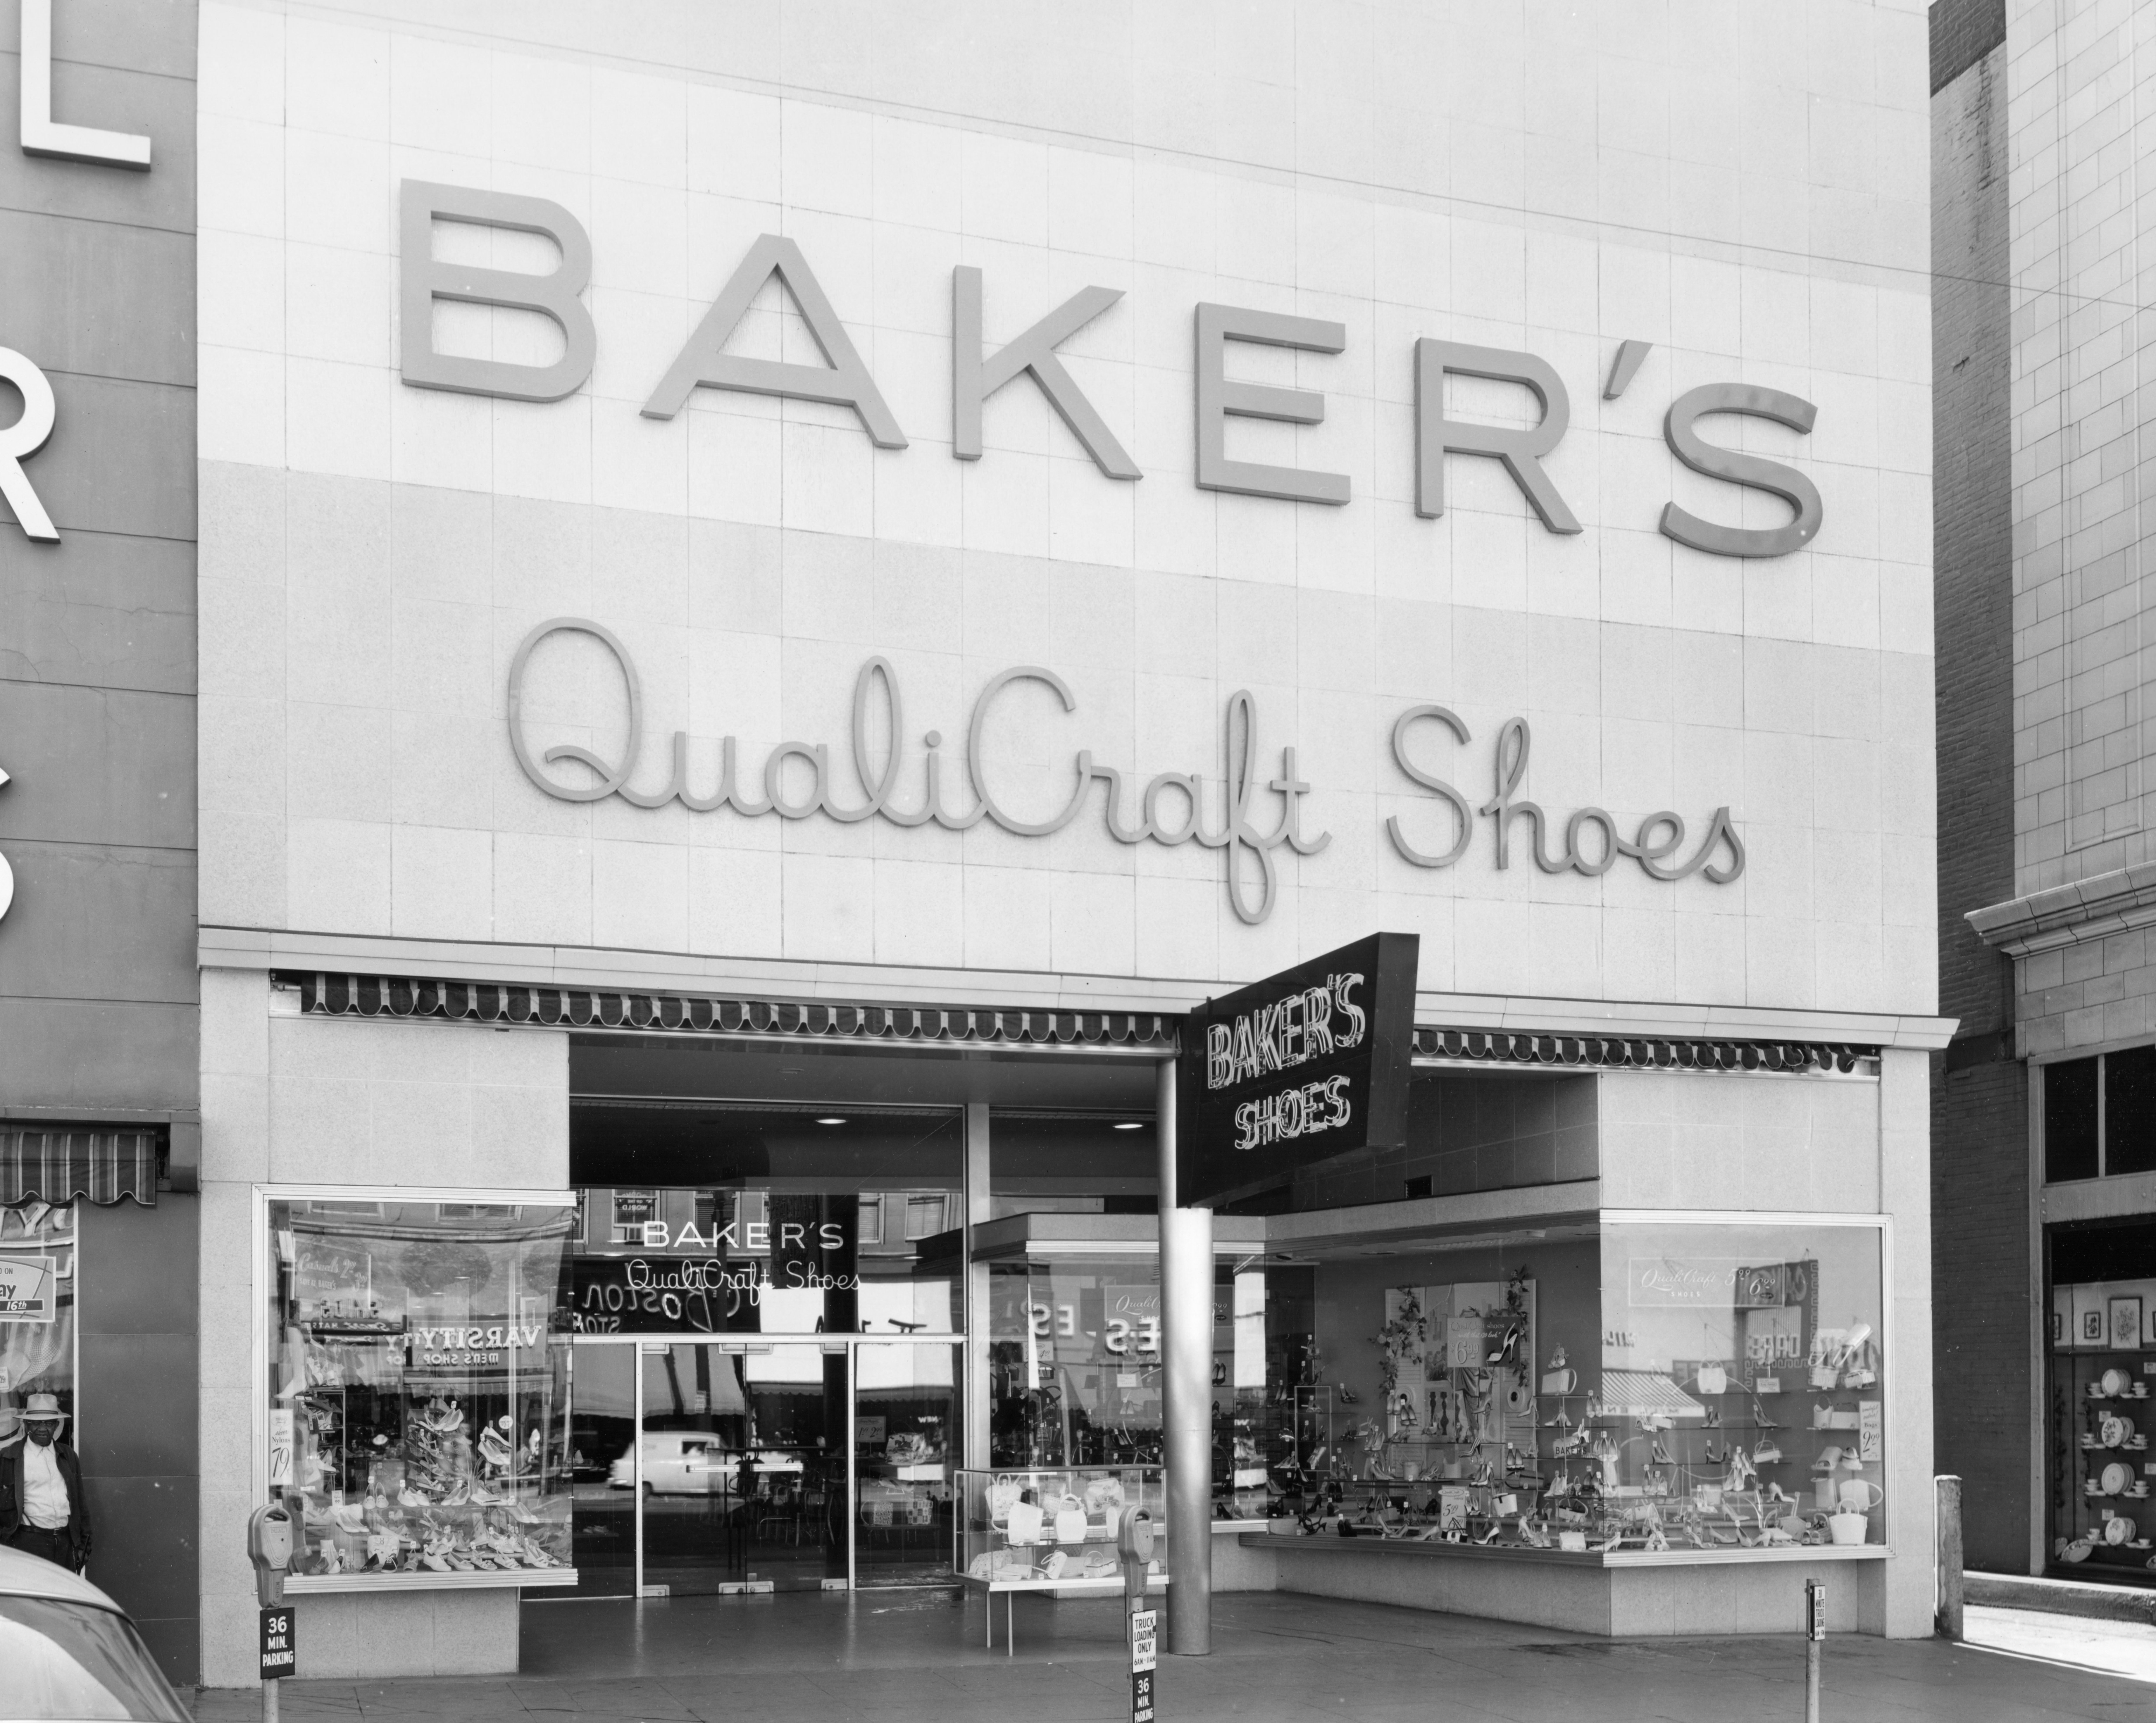 Bakers Shoe Store P.1 | Department of Cultural and Community Engagement |  J. Willard Marriott Digital Library